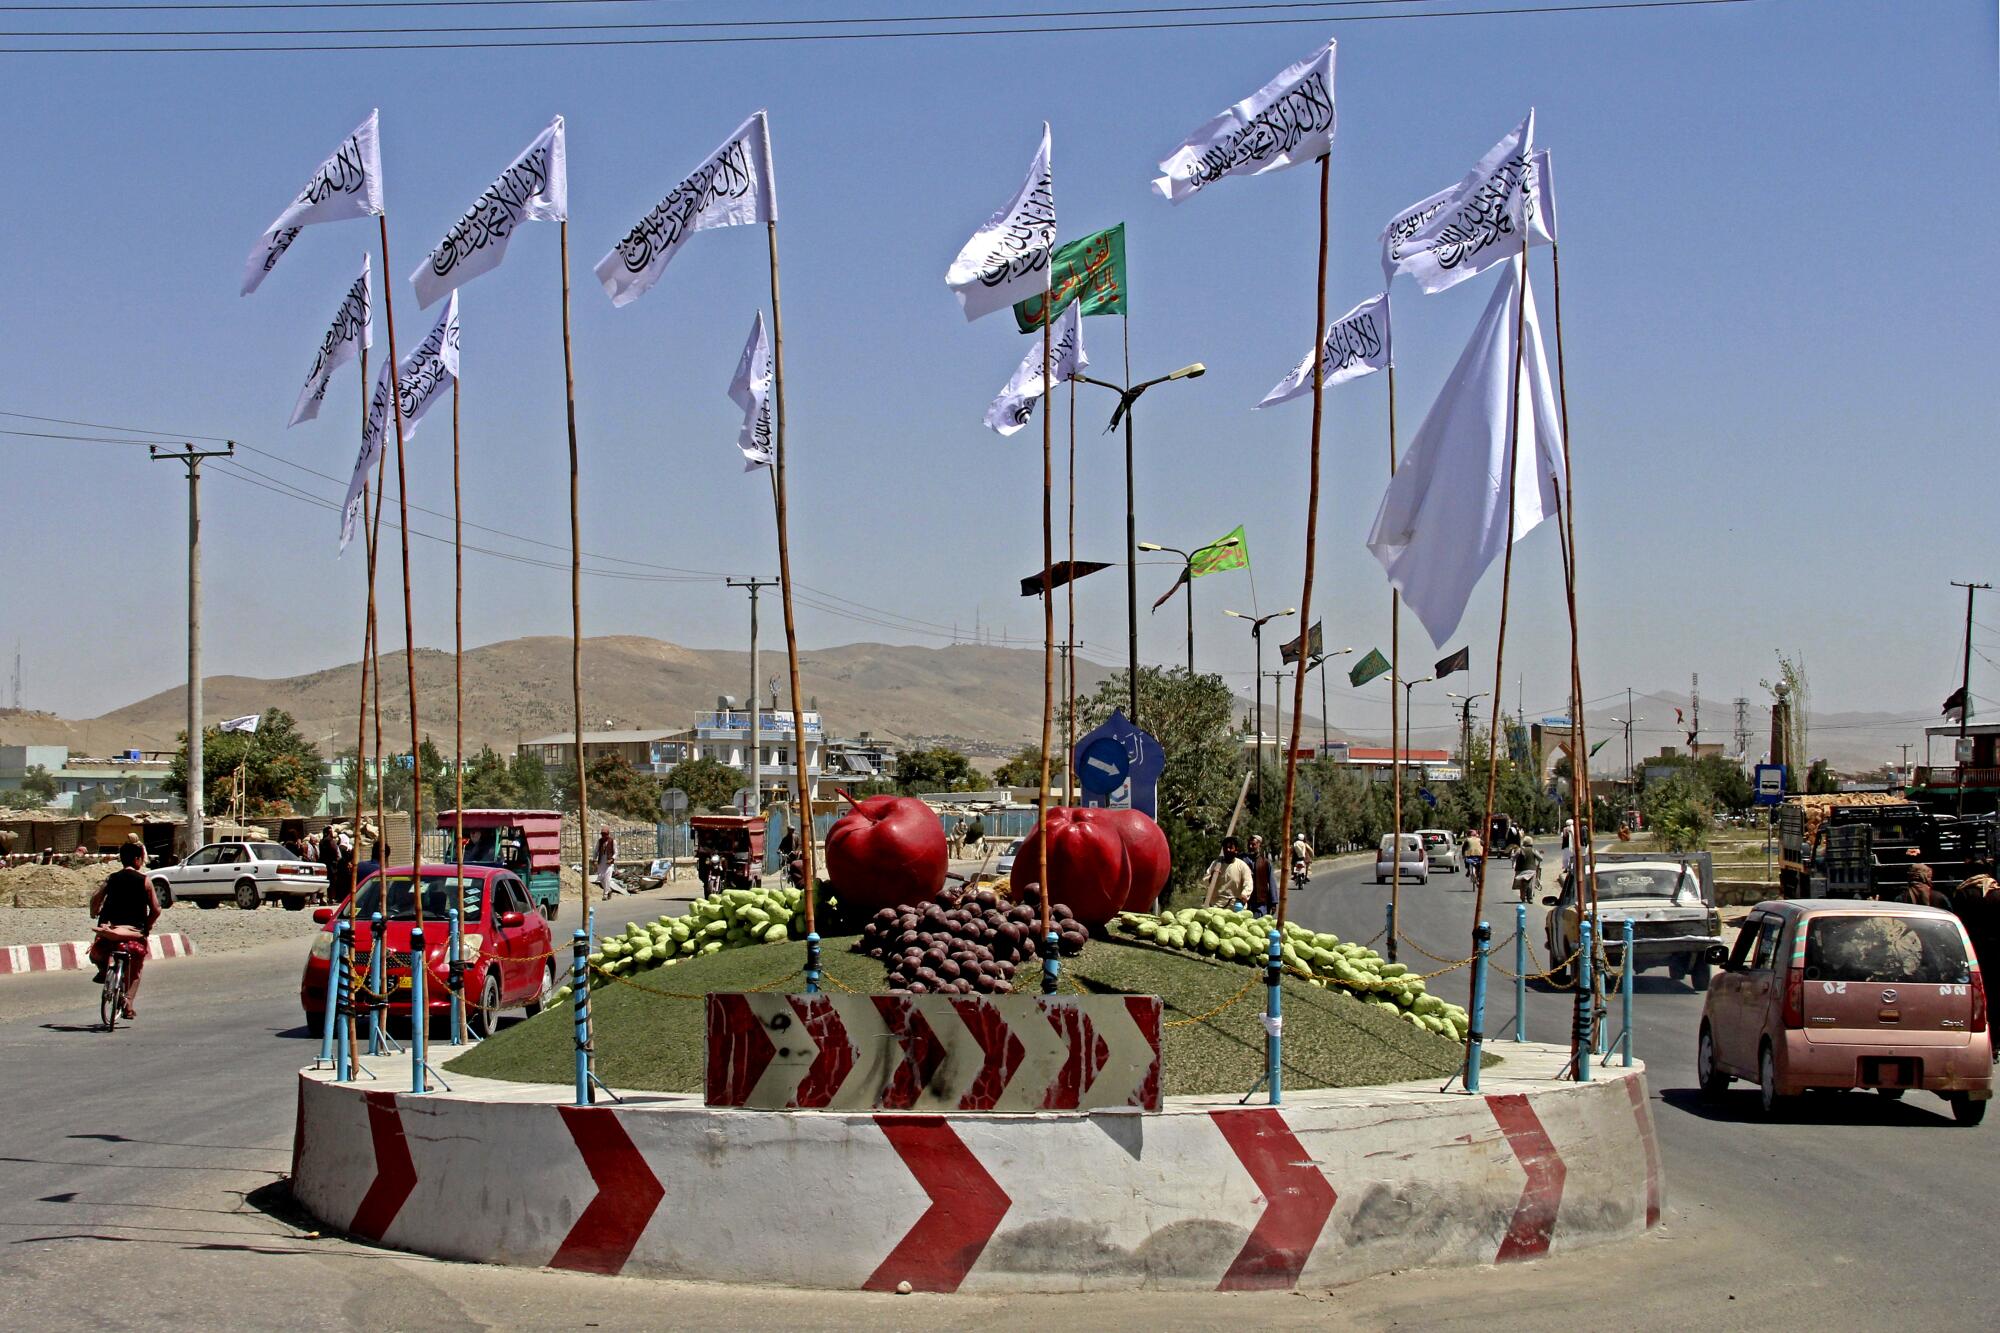 White Taliban flags surround a traffic circle that is decorated with sculptures of fruit